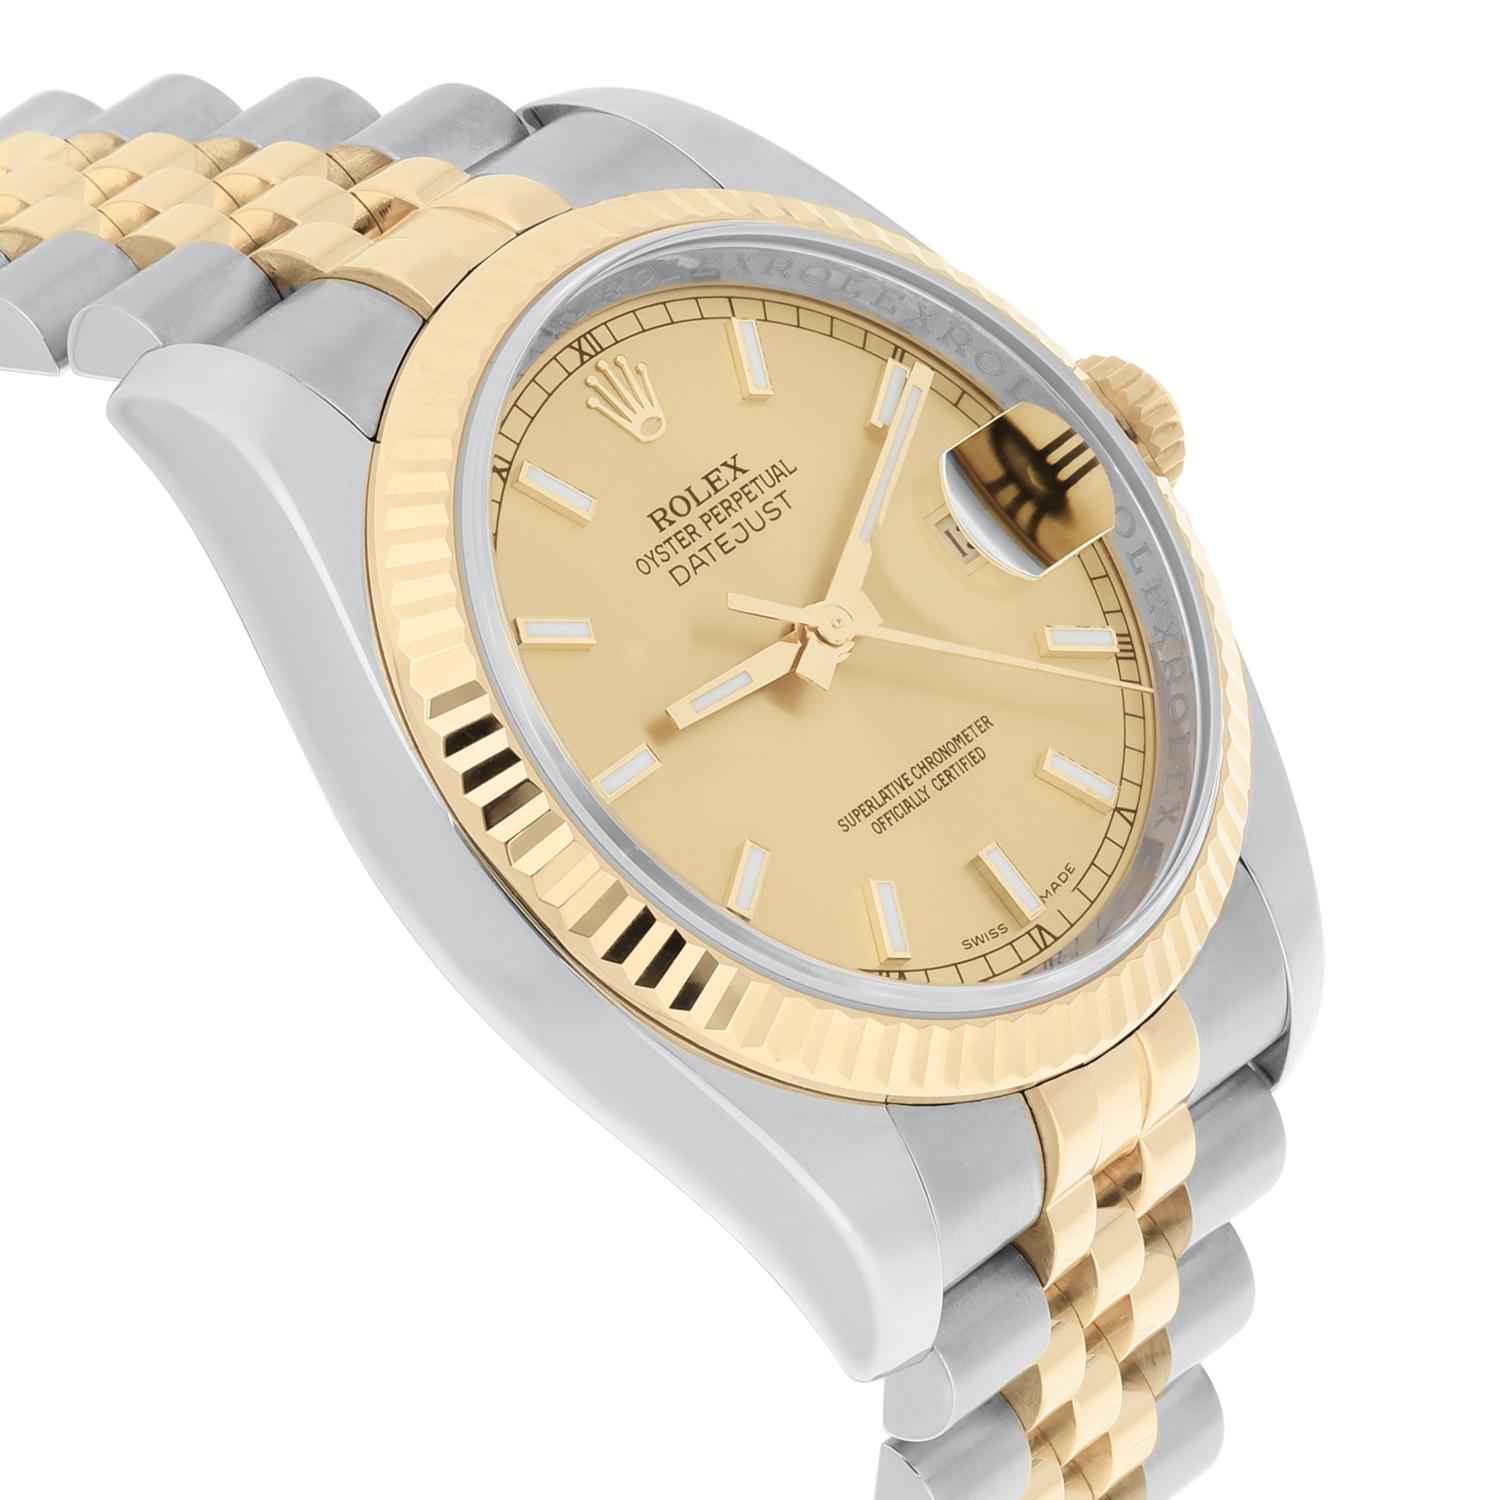 Rolex Datejust 36 Gold and Steel 116233 Watch Champagne Index Dial Jubilee Watch For Sale 1